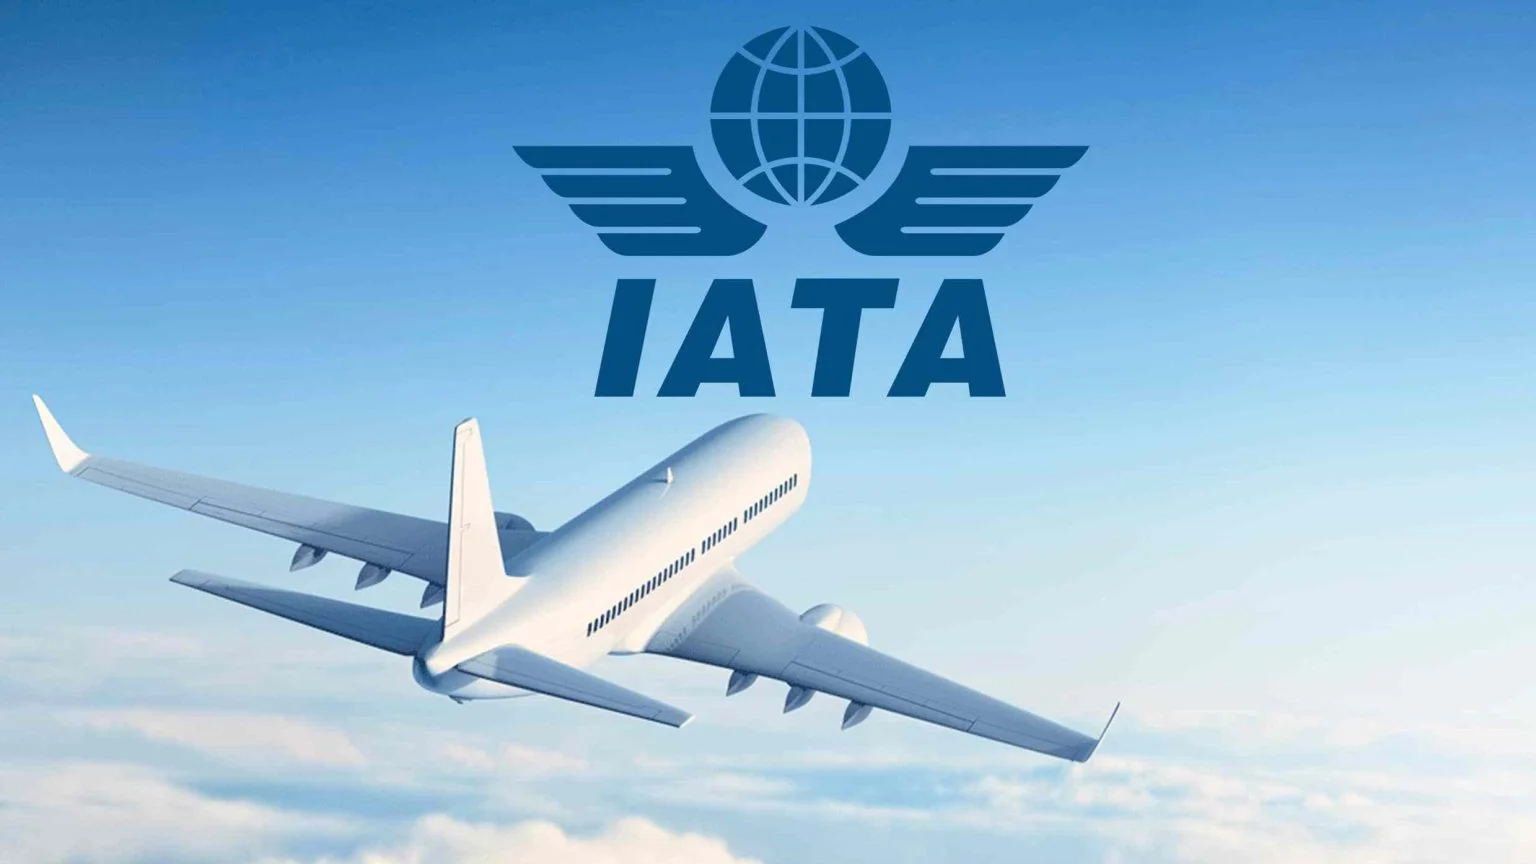 Nigeria Risks Losing Airlines Over Troubling $802M Trapped Funds -- IATA